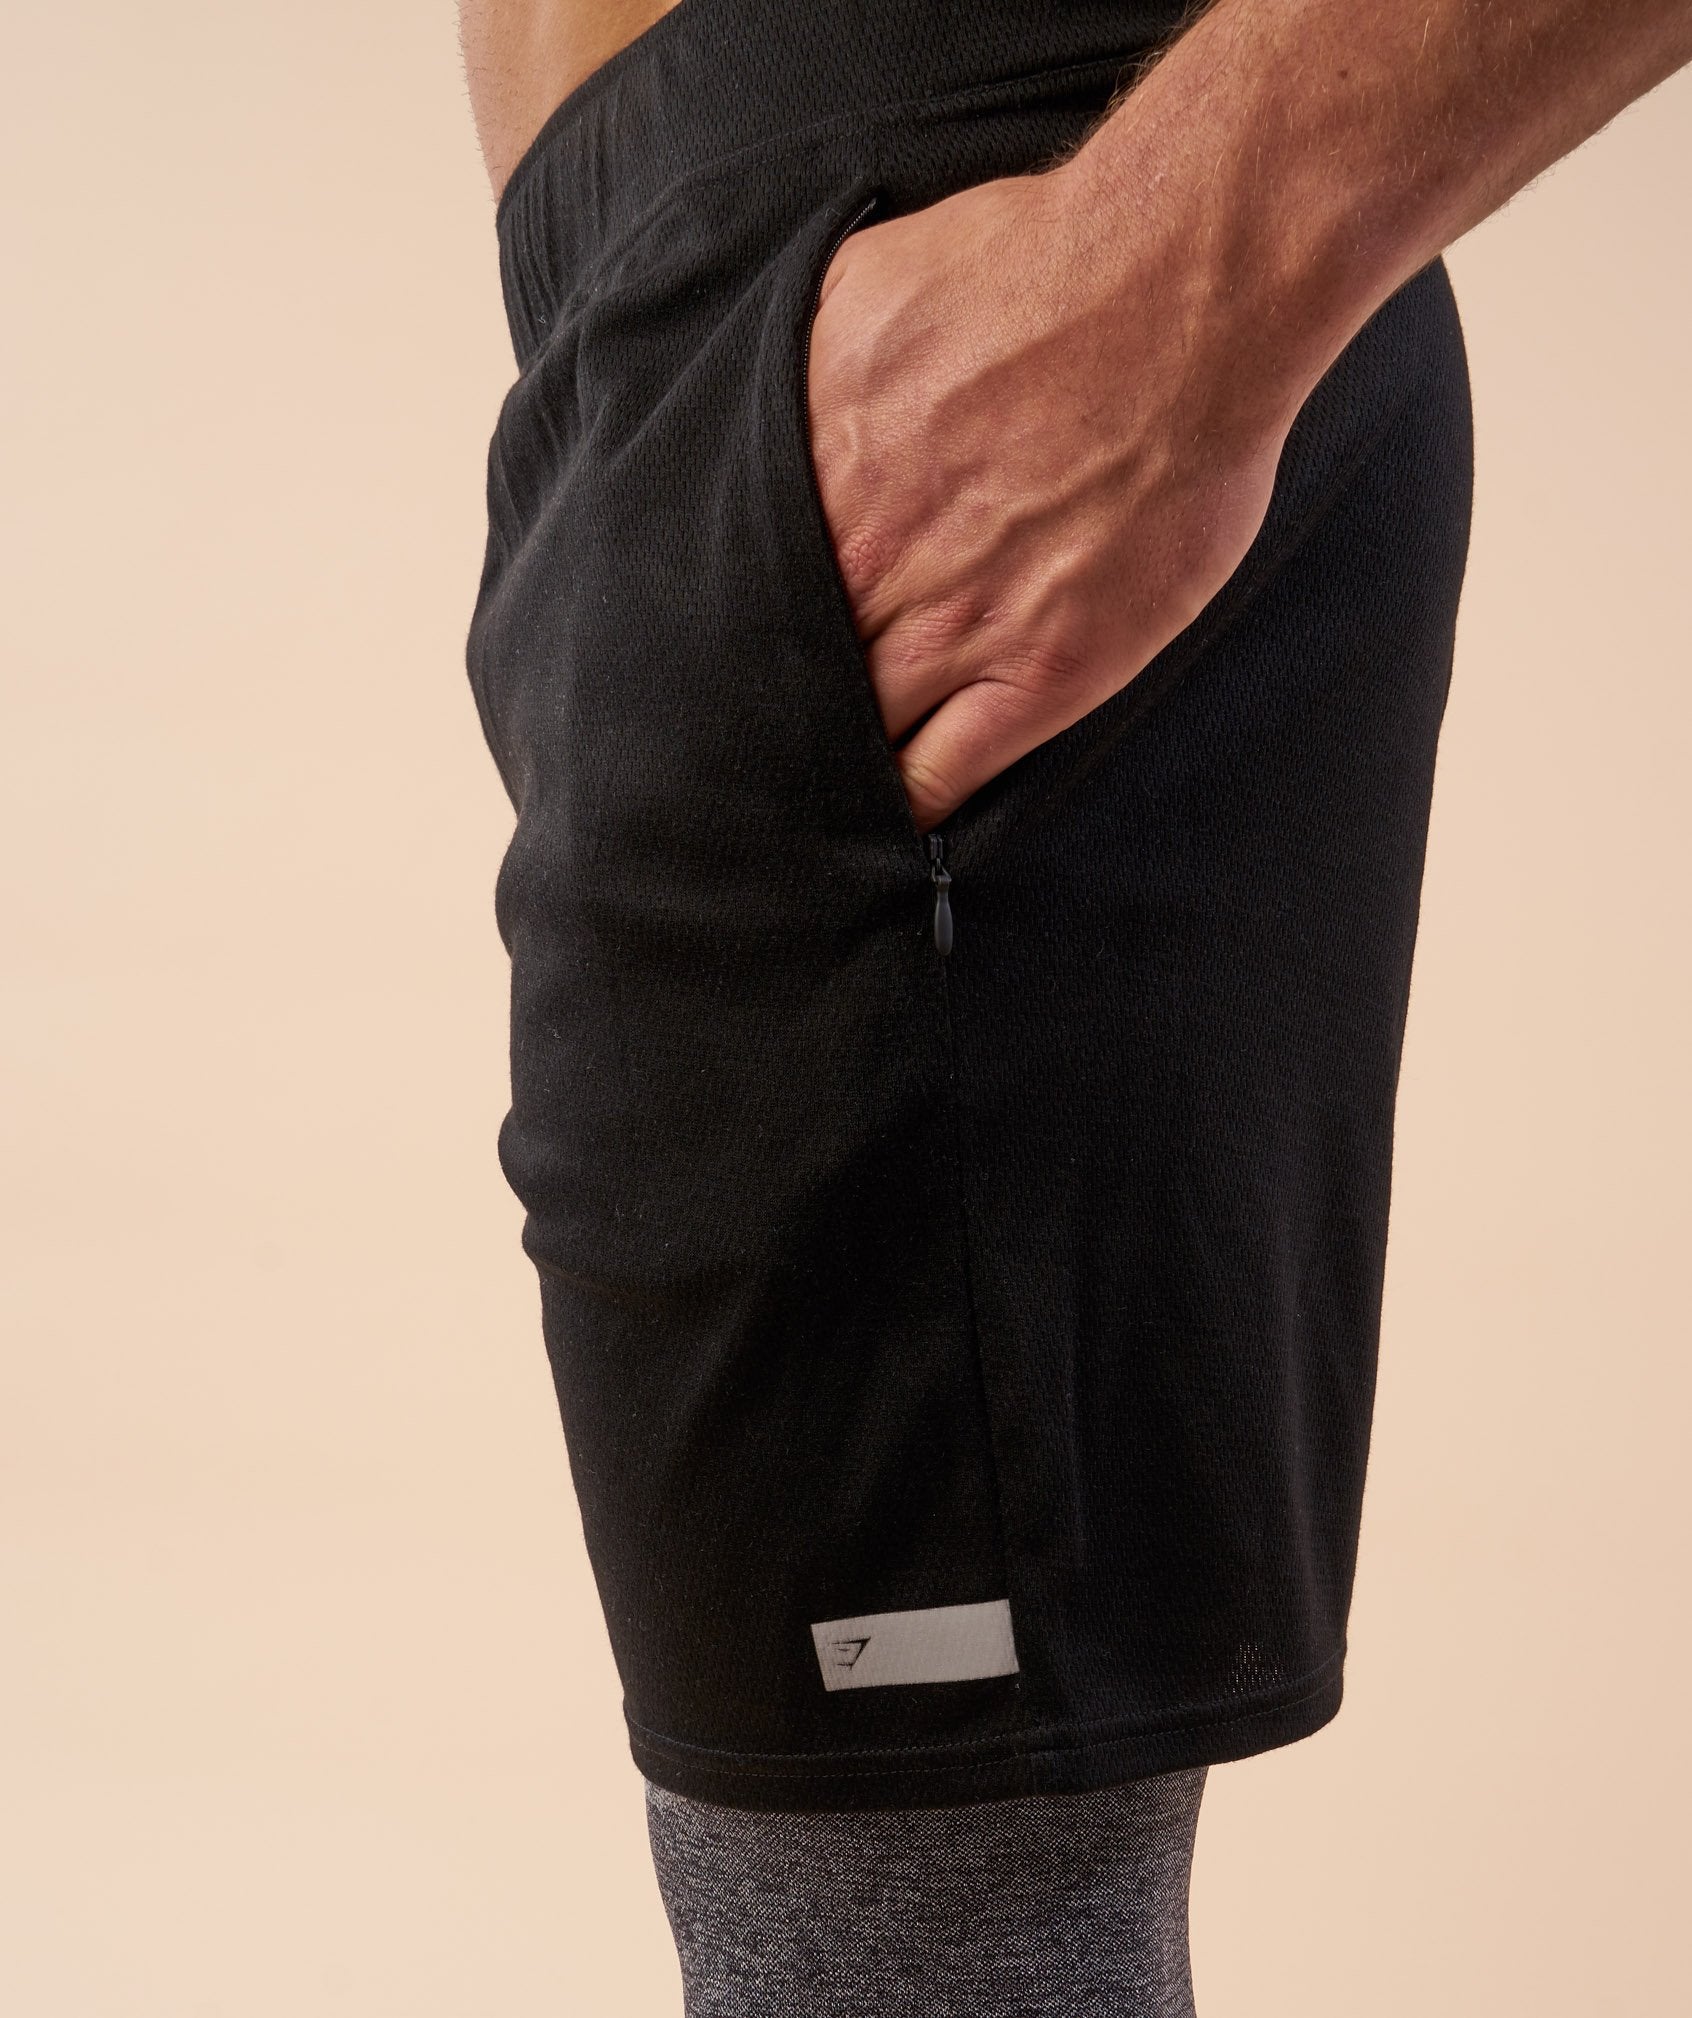 Free Flow Shorts in Black - view 6